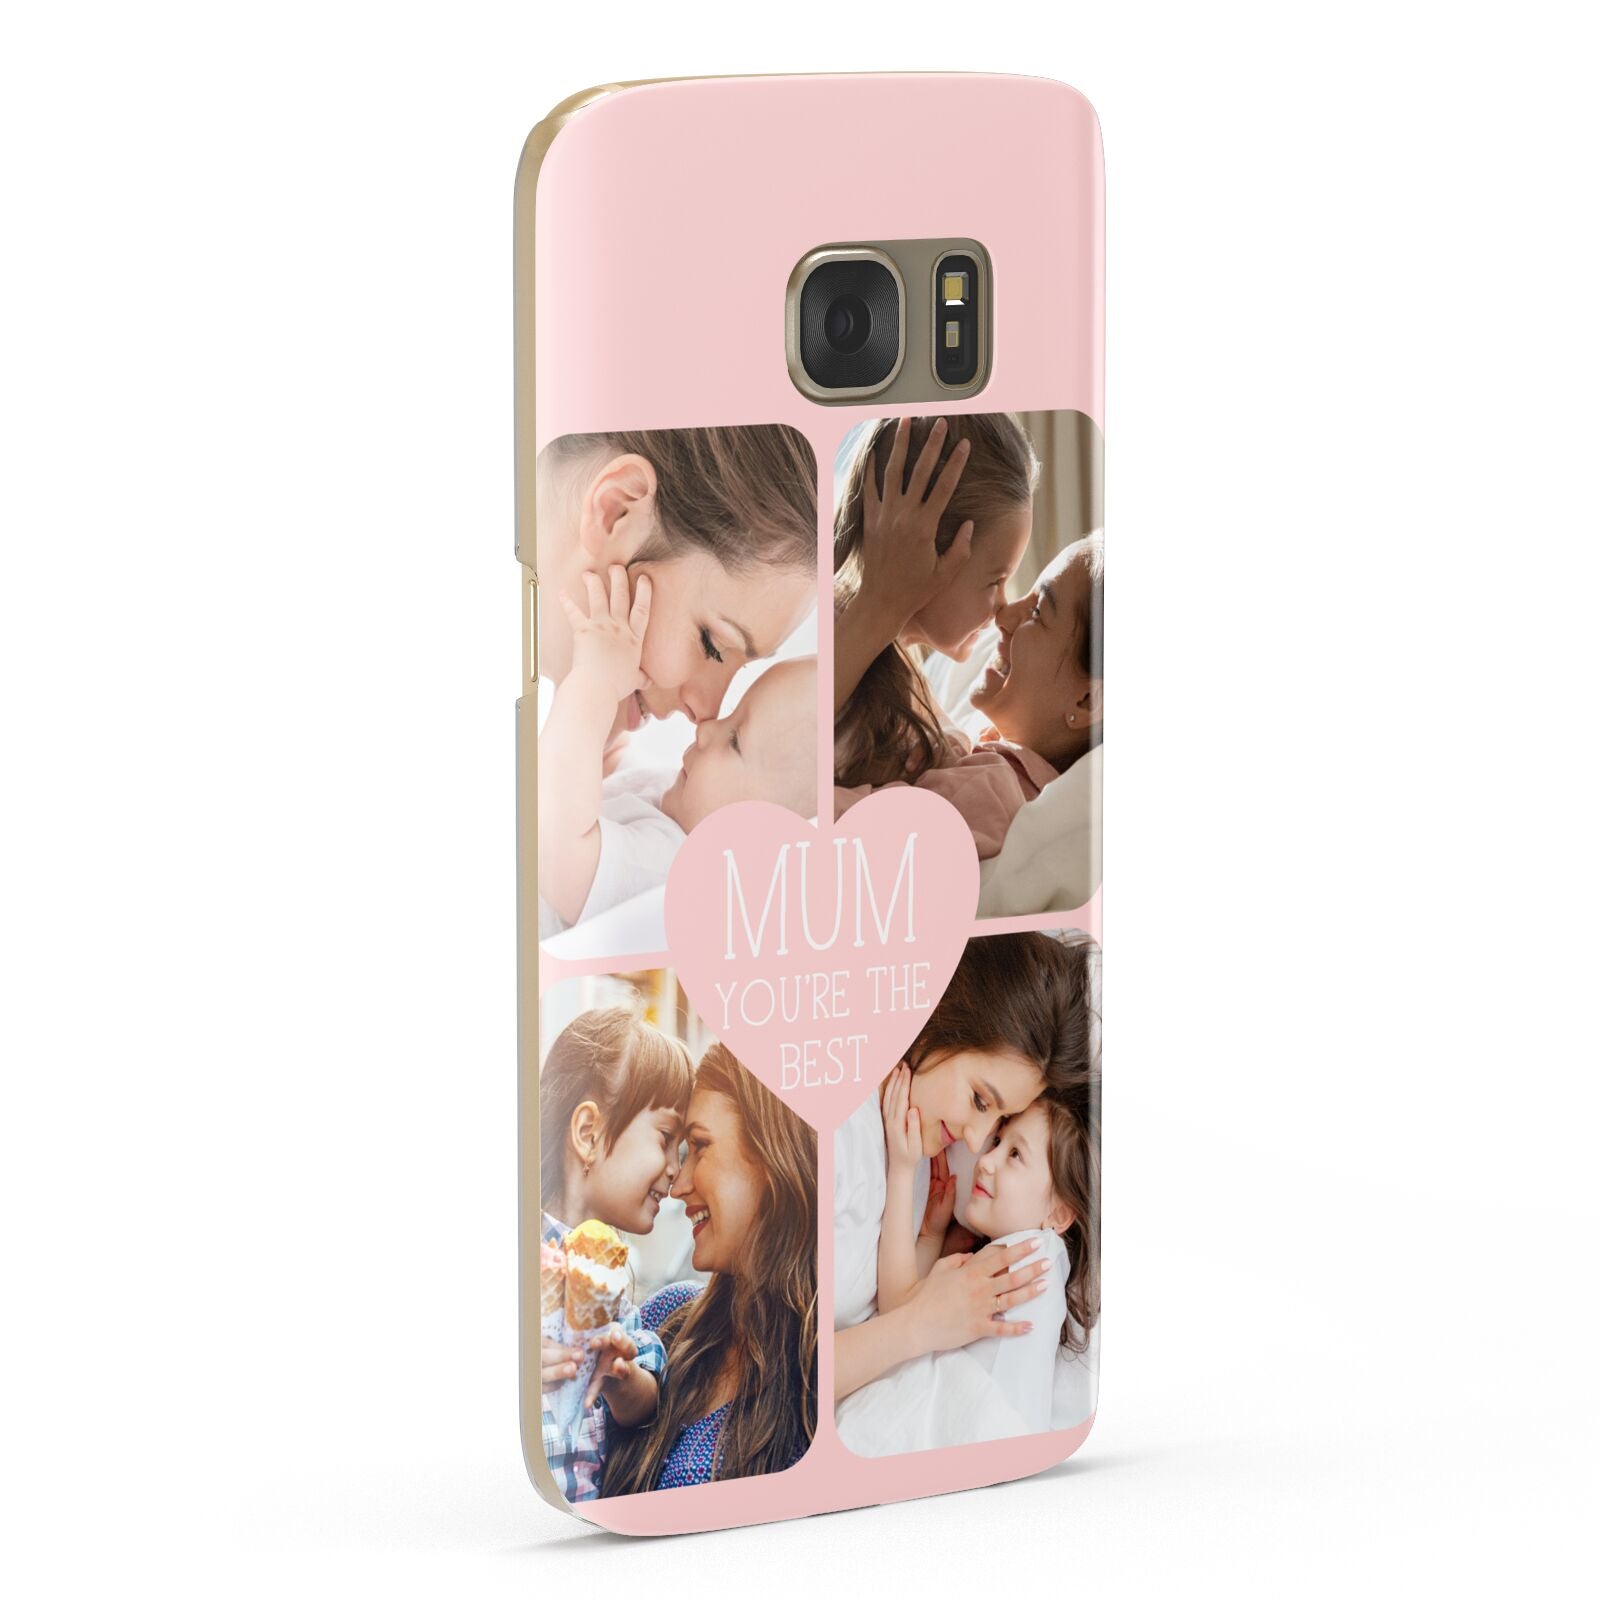 Mothers Day Four Photo Upload Samsung Galaxy Case Fourty Five Degrees